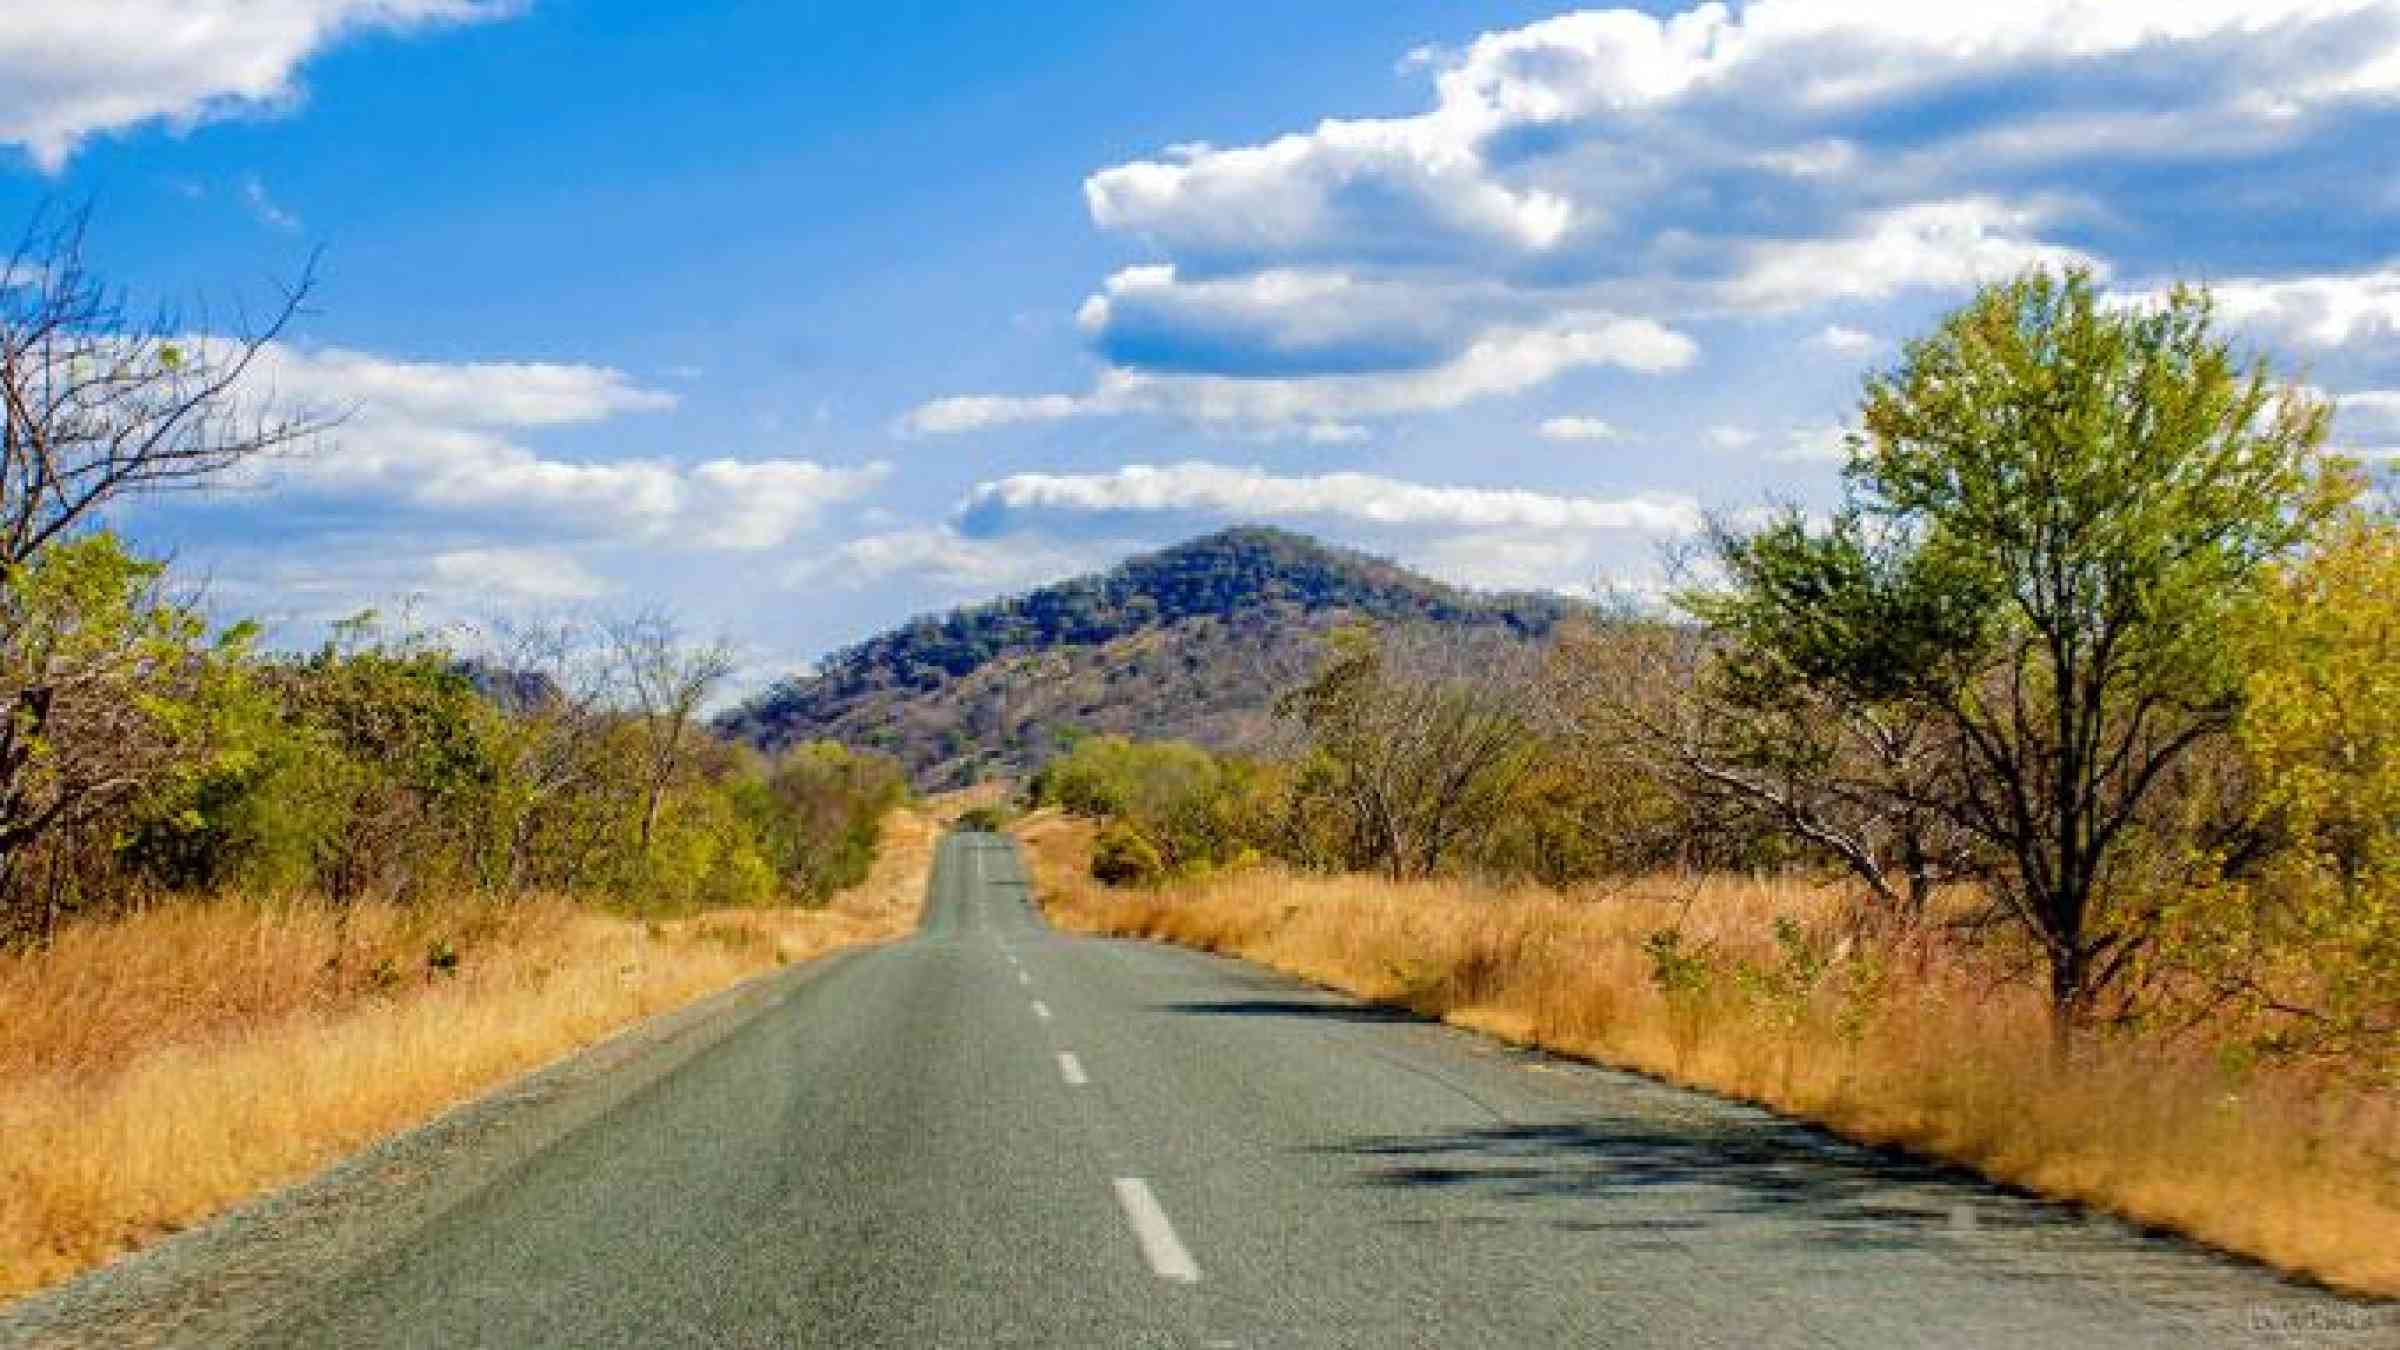 Road in Mozambique. Photo by Flickr Ismail Mia CC BY-NC-ND 2.0 https://flic.kr/p/posQ5r